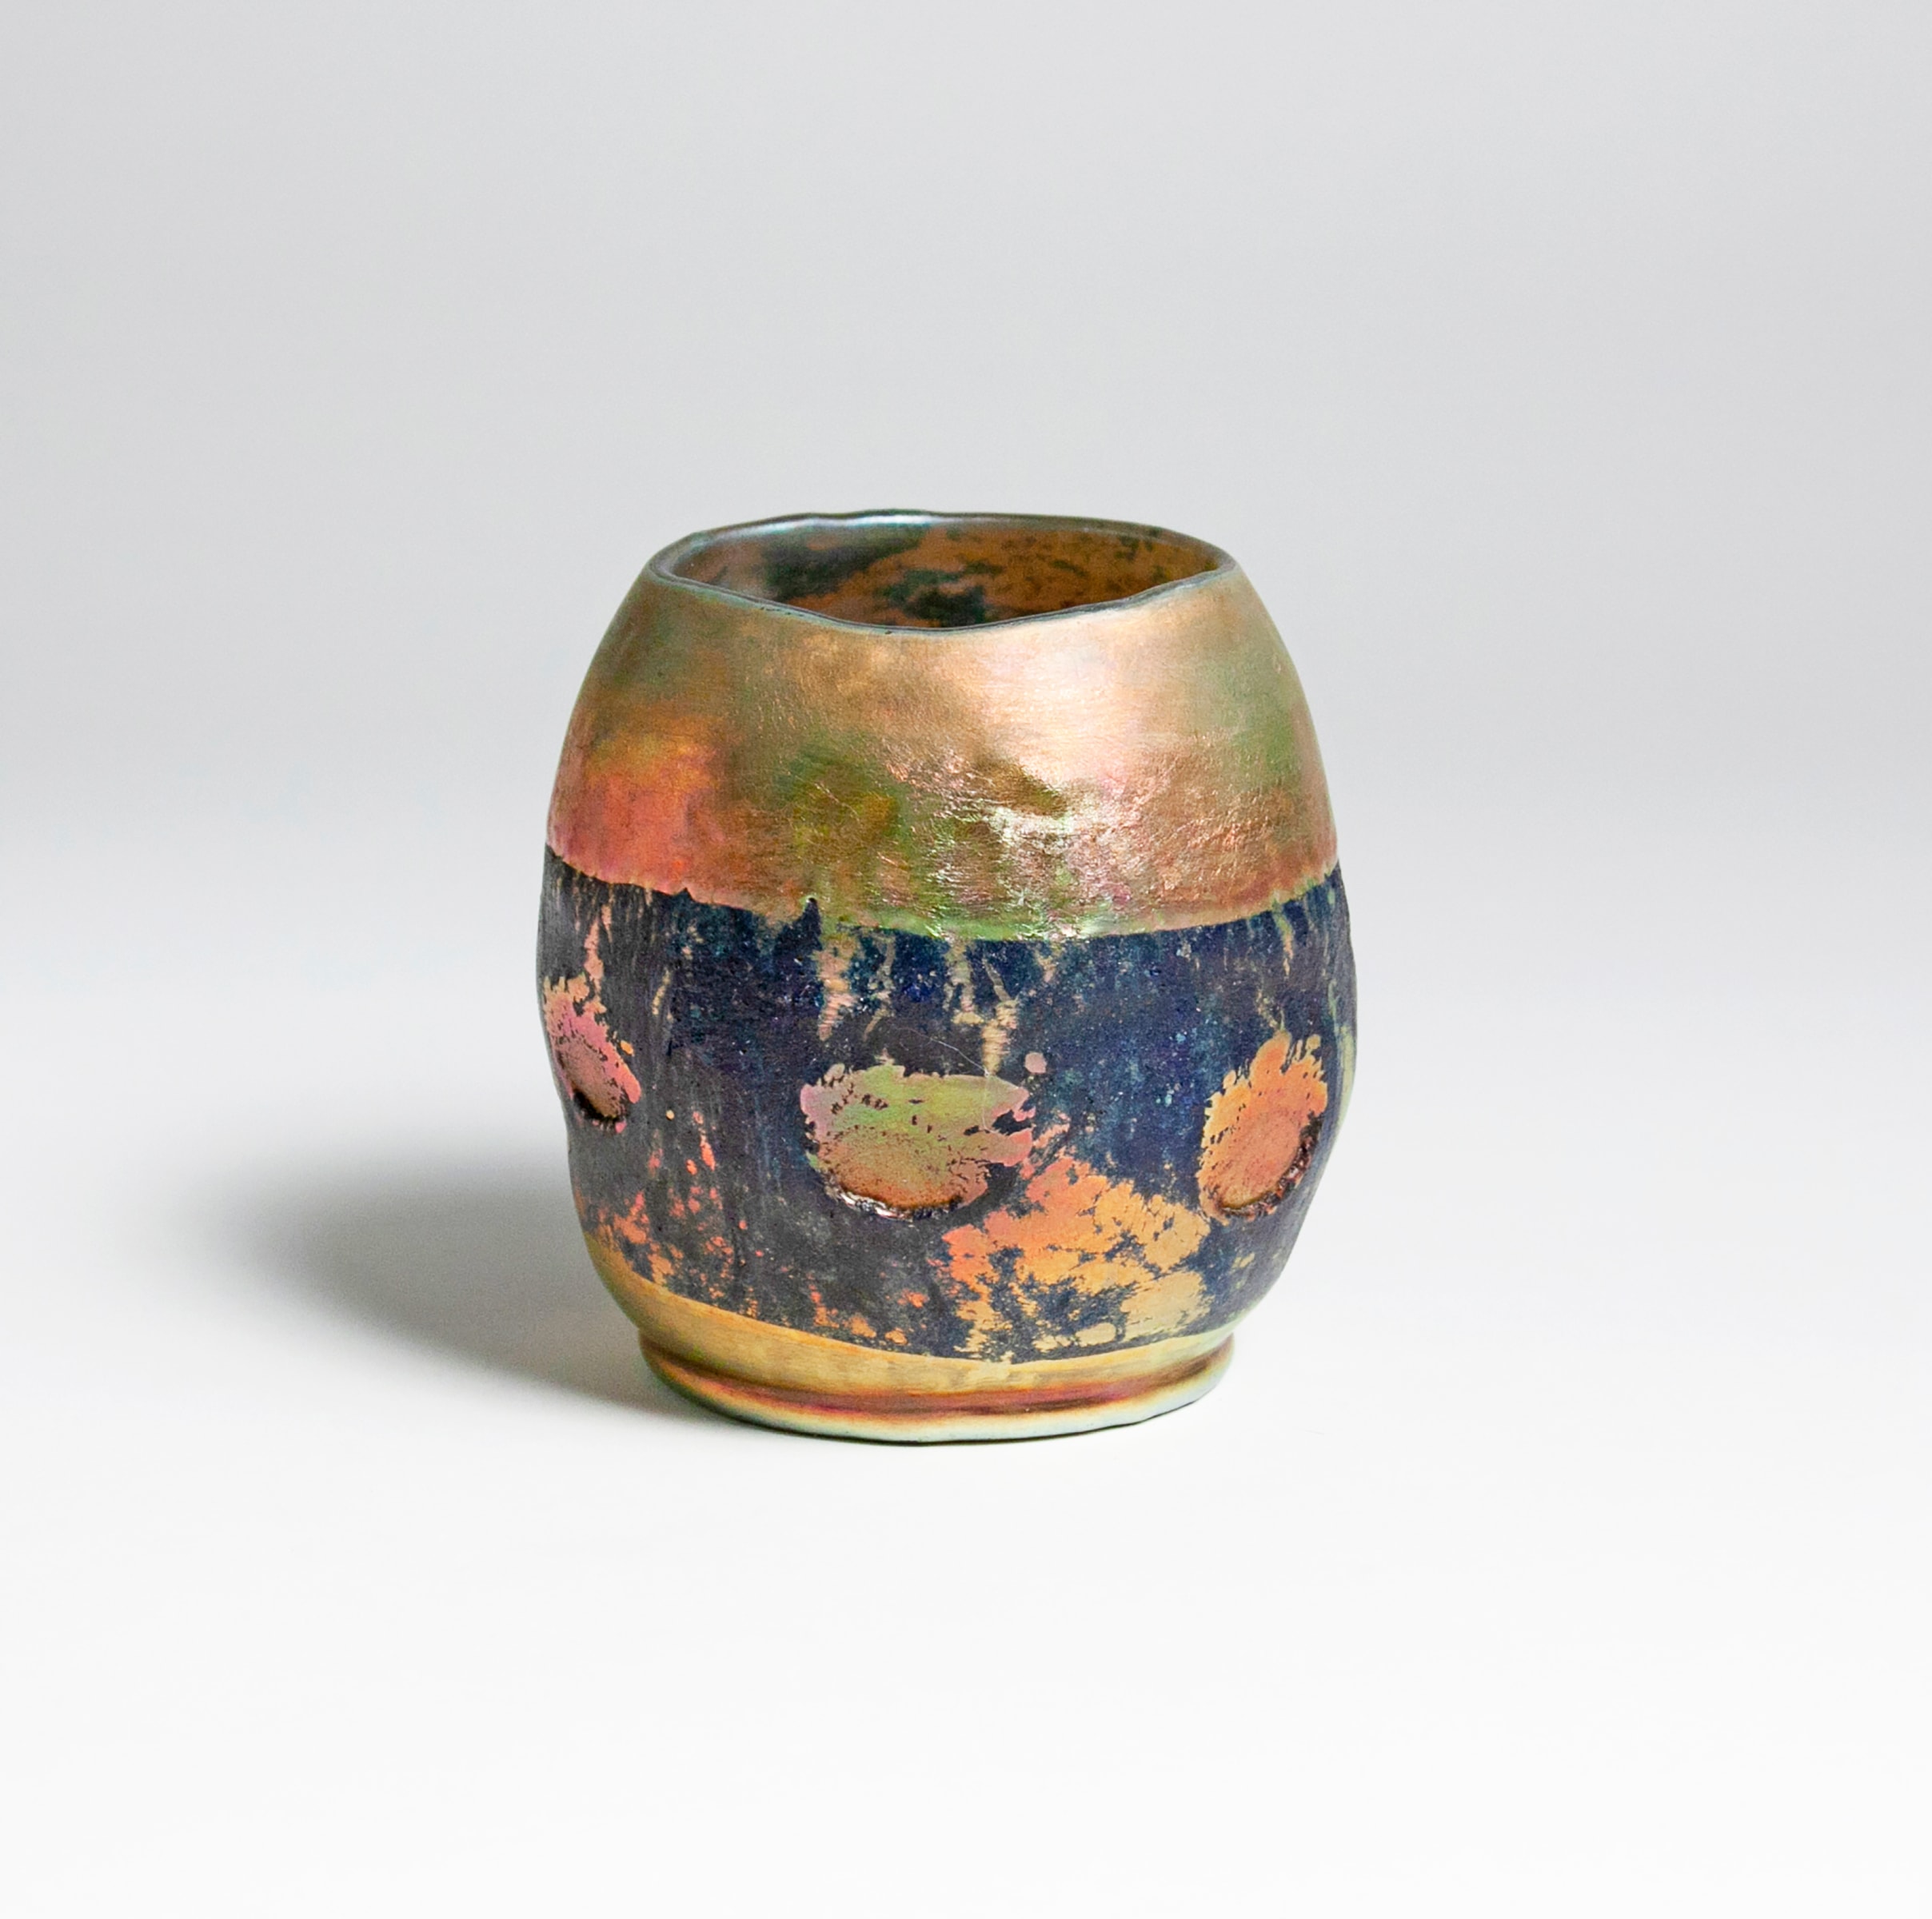 a rare tiffany studios lava favrile glass vase, short irregular cylindrical form recalls japanese raku tea bowls. The body of the vase in gold iridescent glass, a horizontal band of rough textured black matte glass at the center featuring a row of splattered dots of glass in the same gold iridescent.